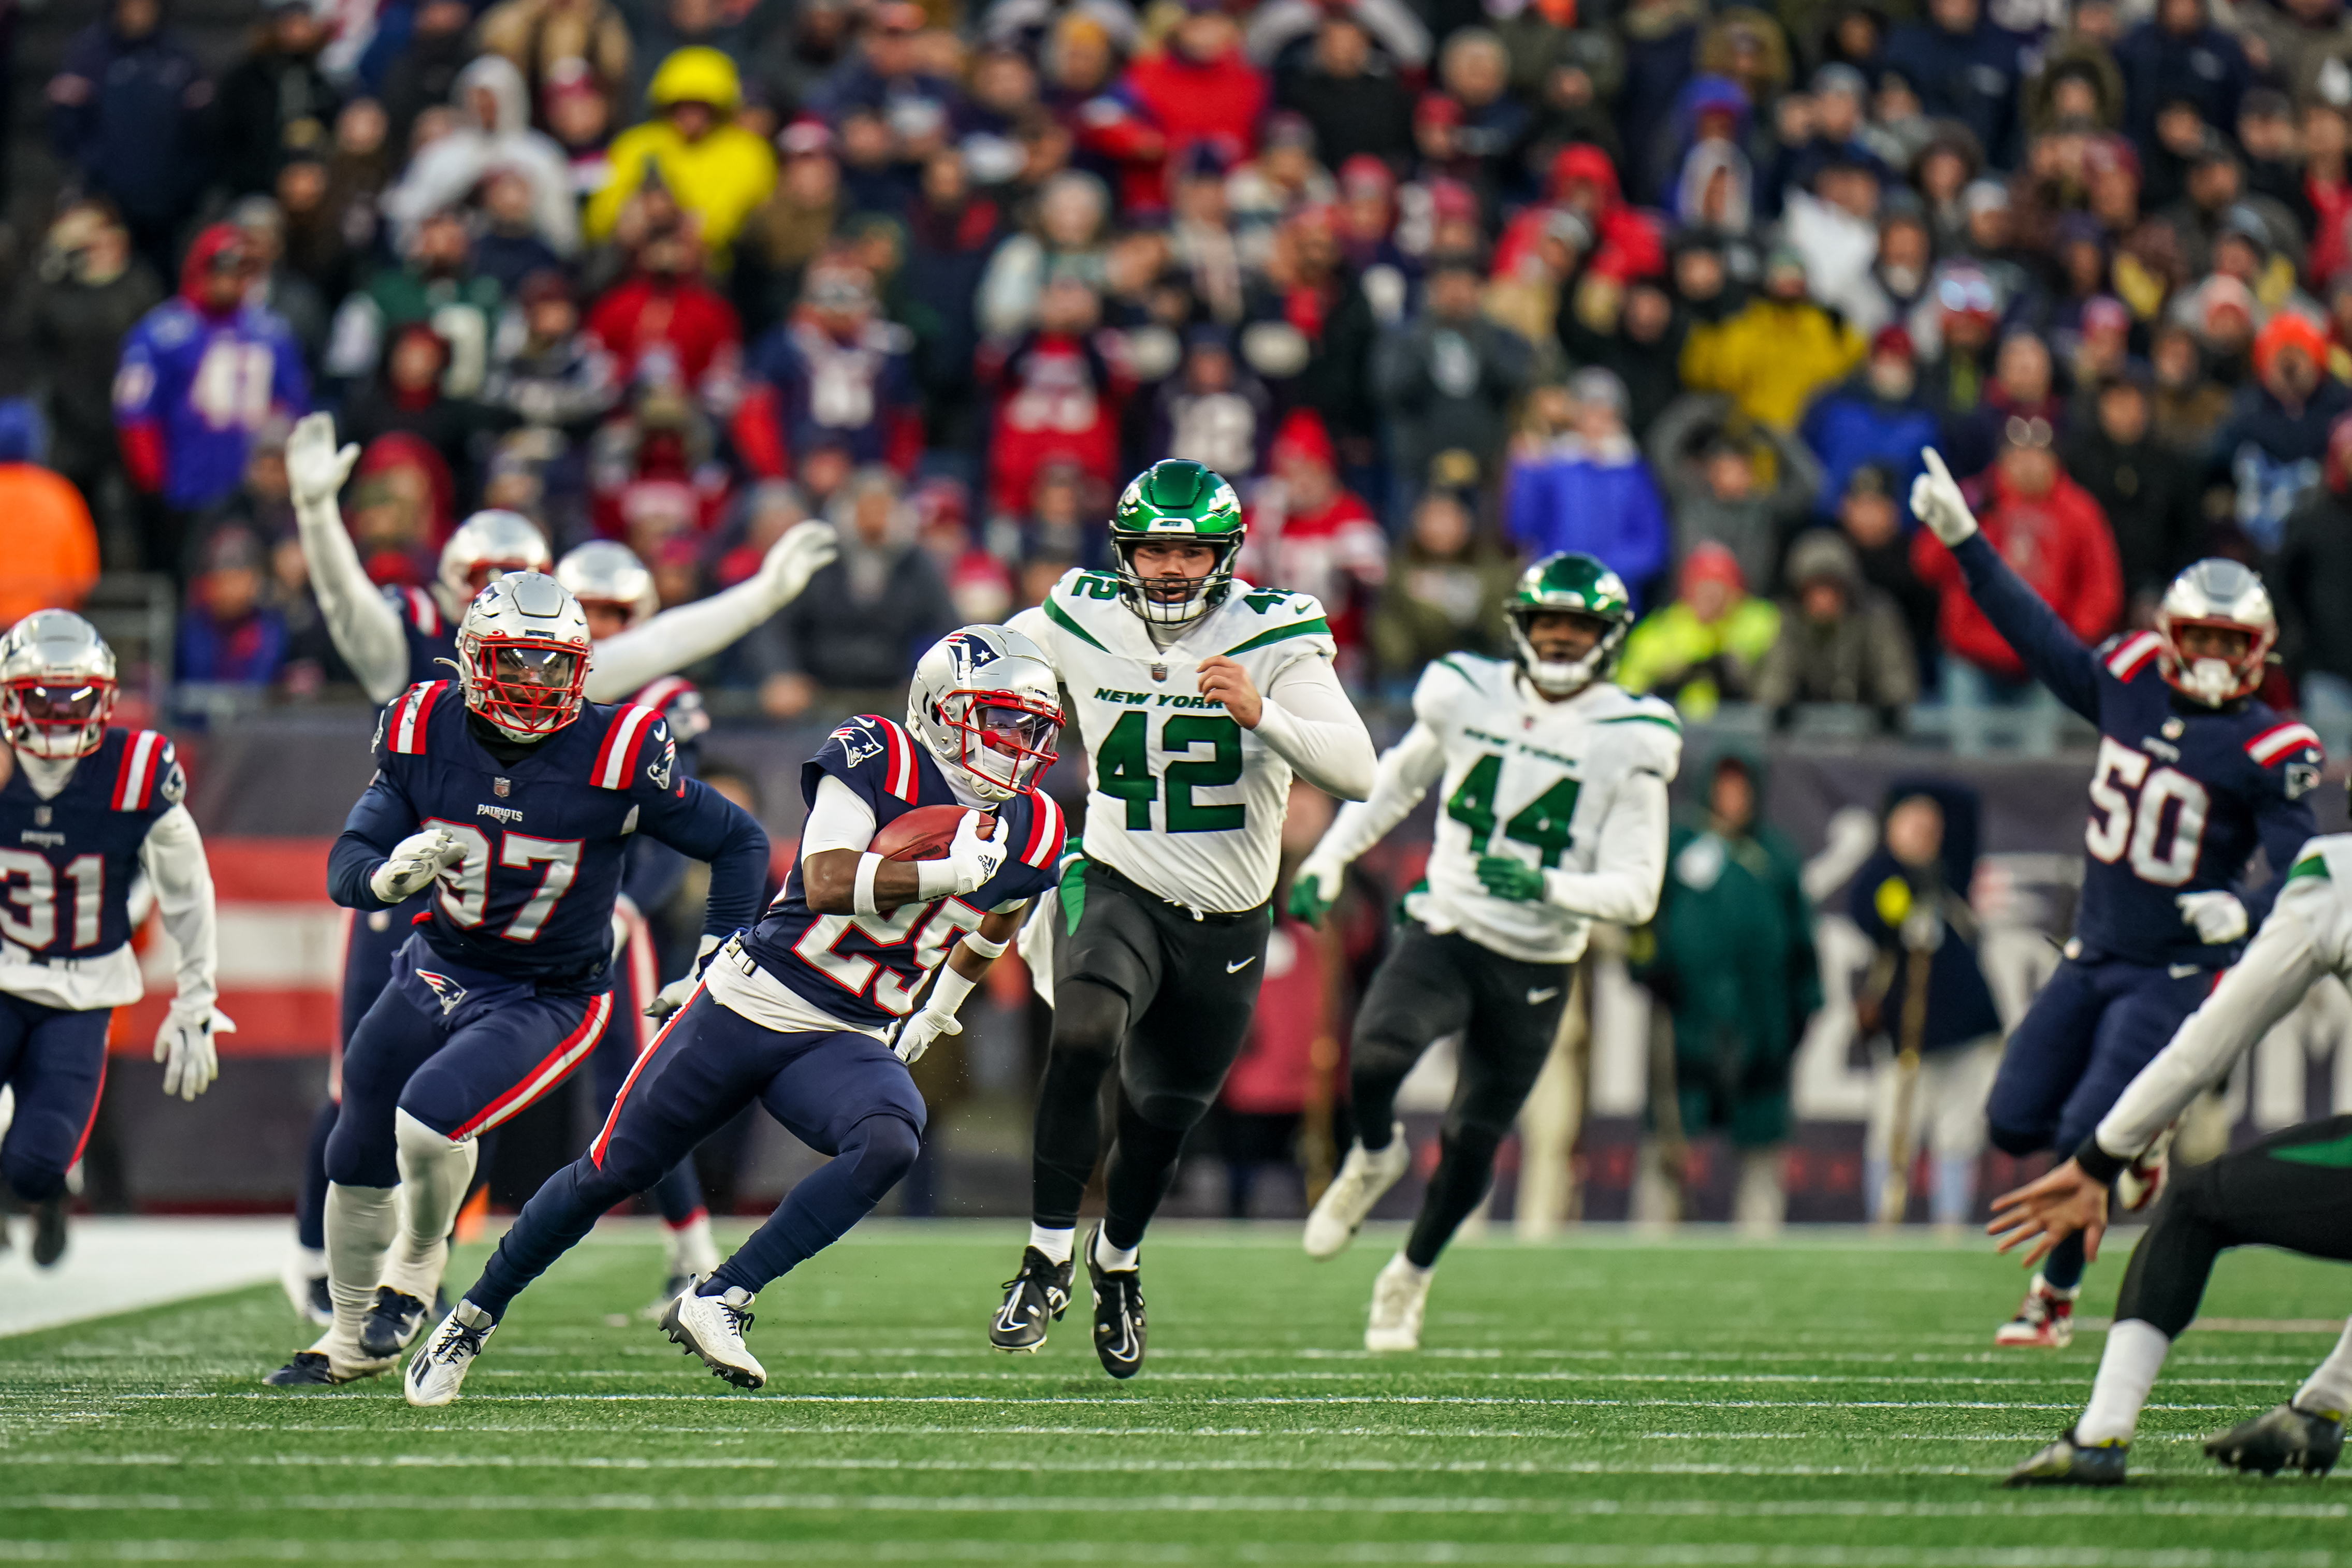 New England Patriots special teams Marcus Jones (25) returns the kick for a touchdown to win the game against the New York Jets in the second half at Gillette Stadium.